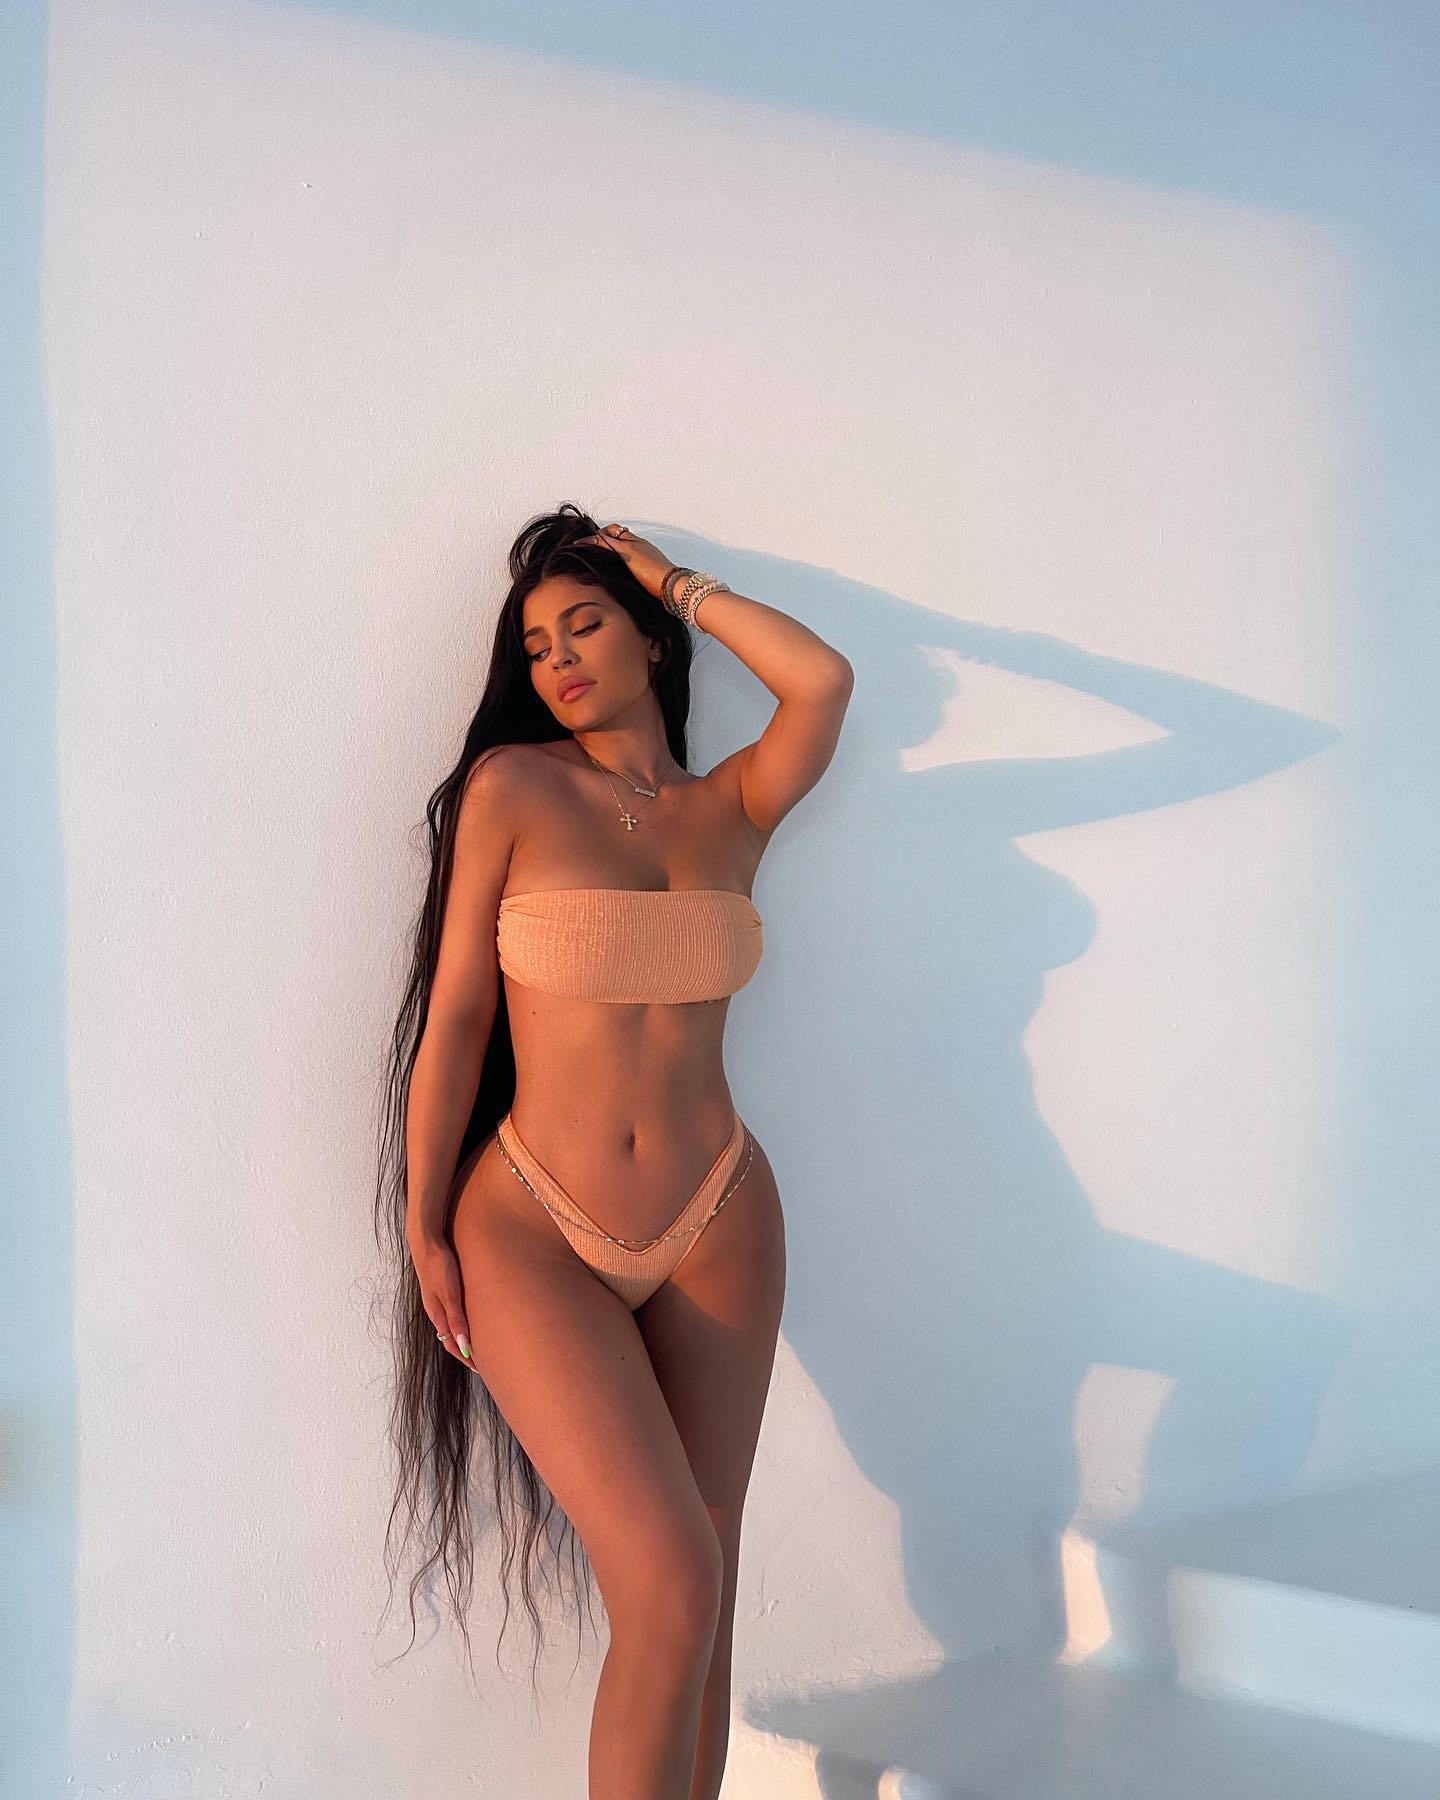 Kylie Jenner’s Shadow is Breaking the Internet! - Photo 1